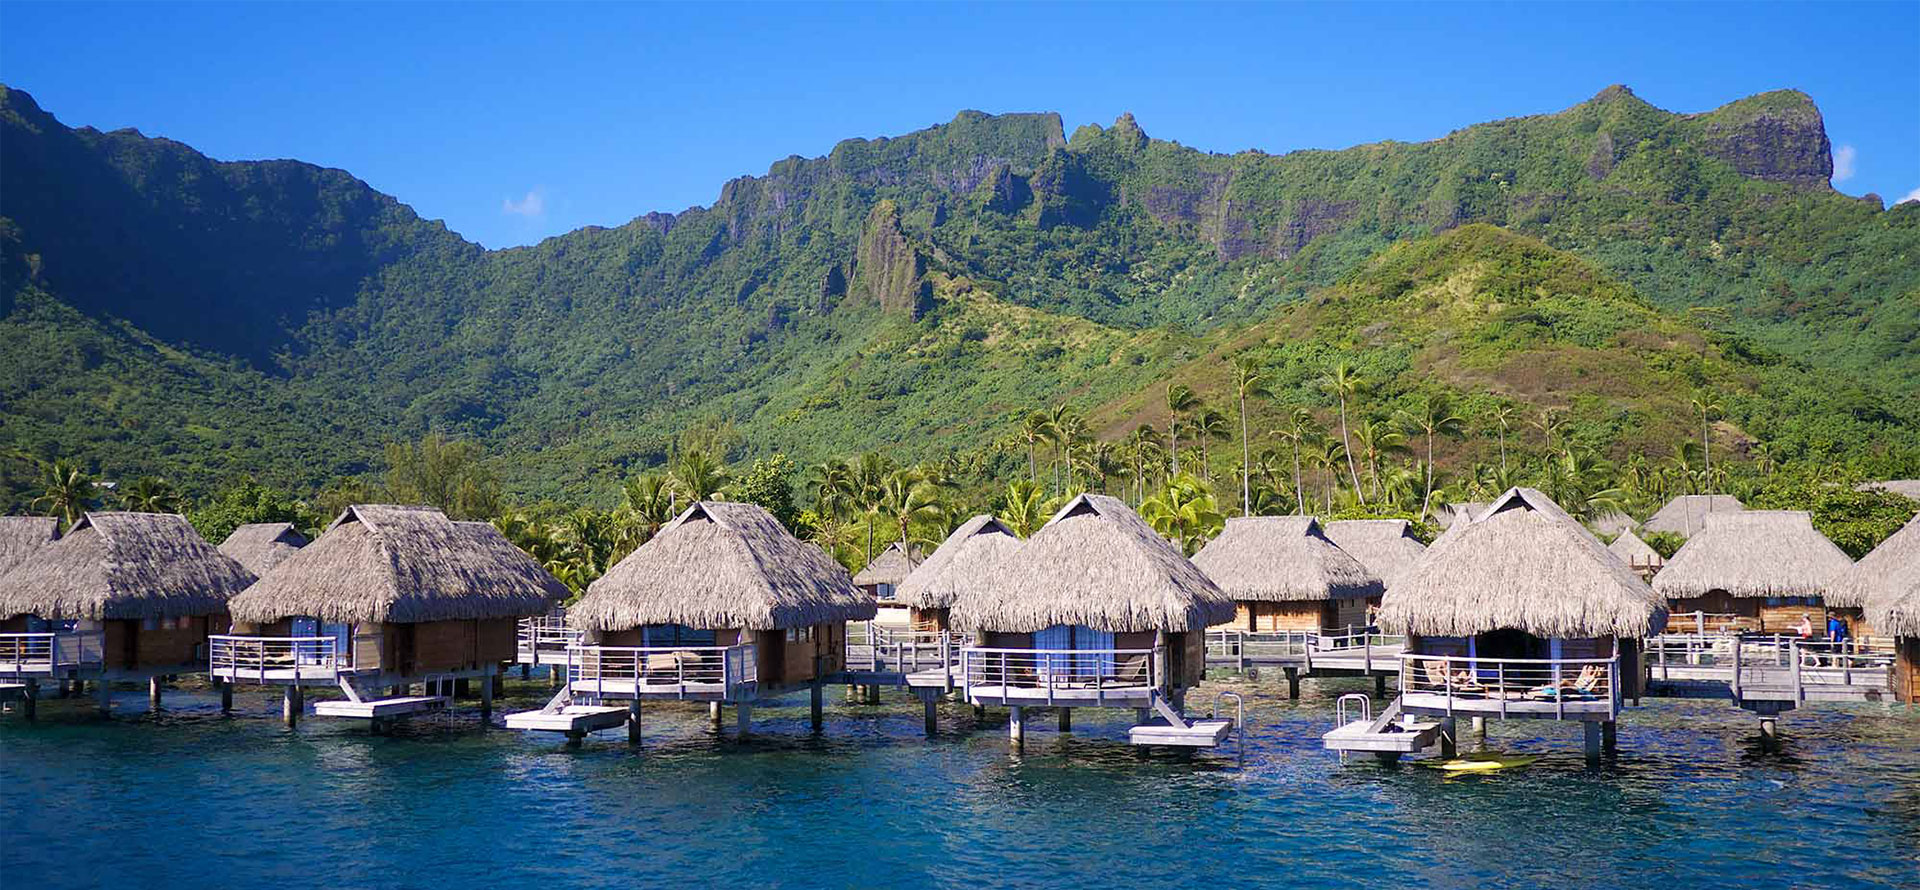 Beautiful view Moorea overwater bungalows and mountains.